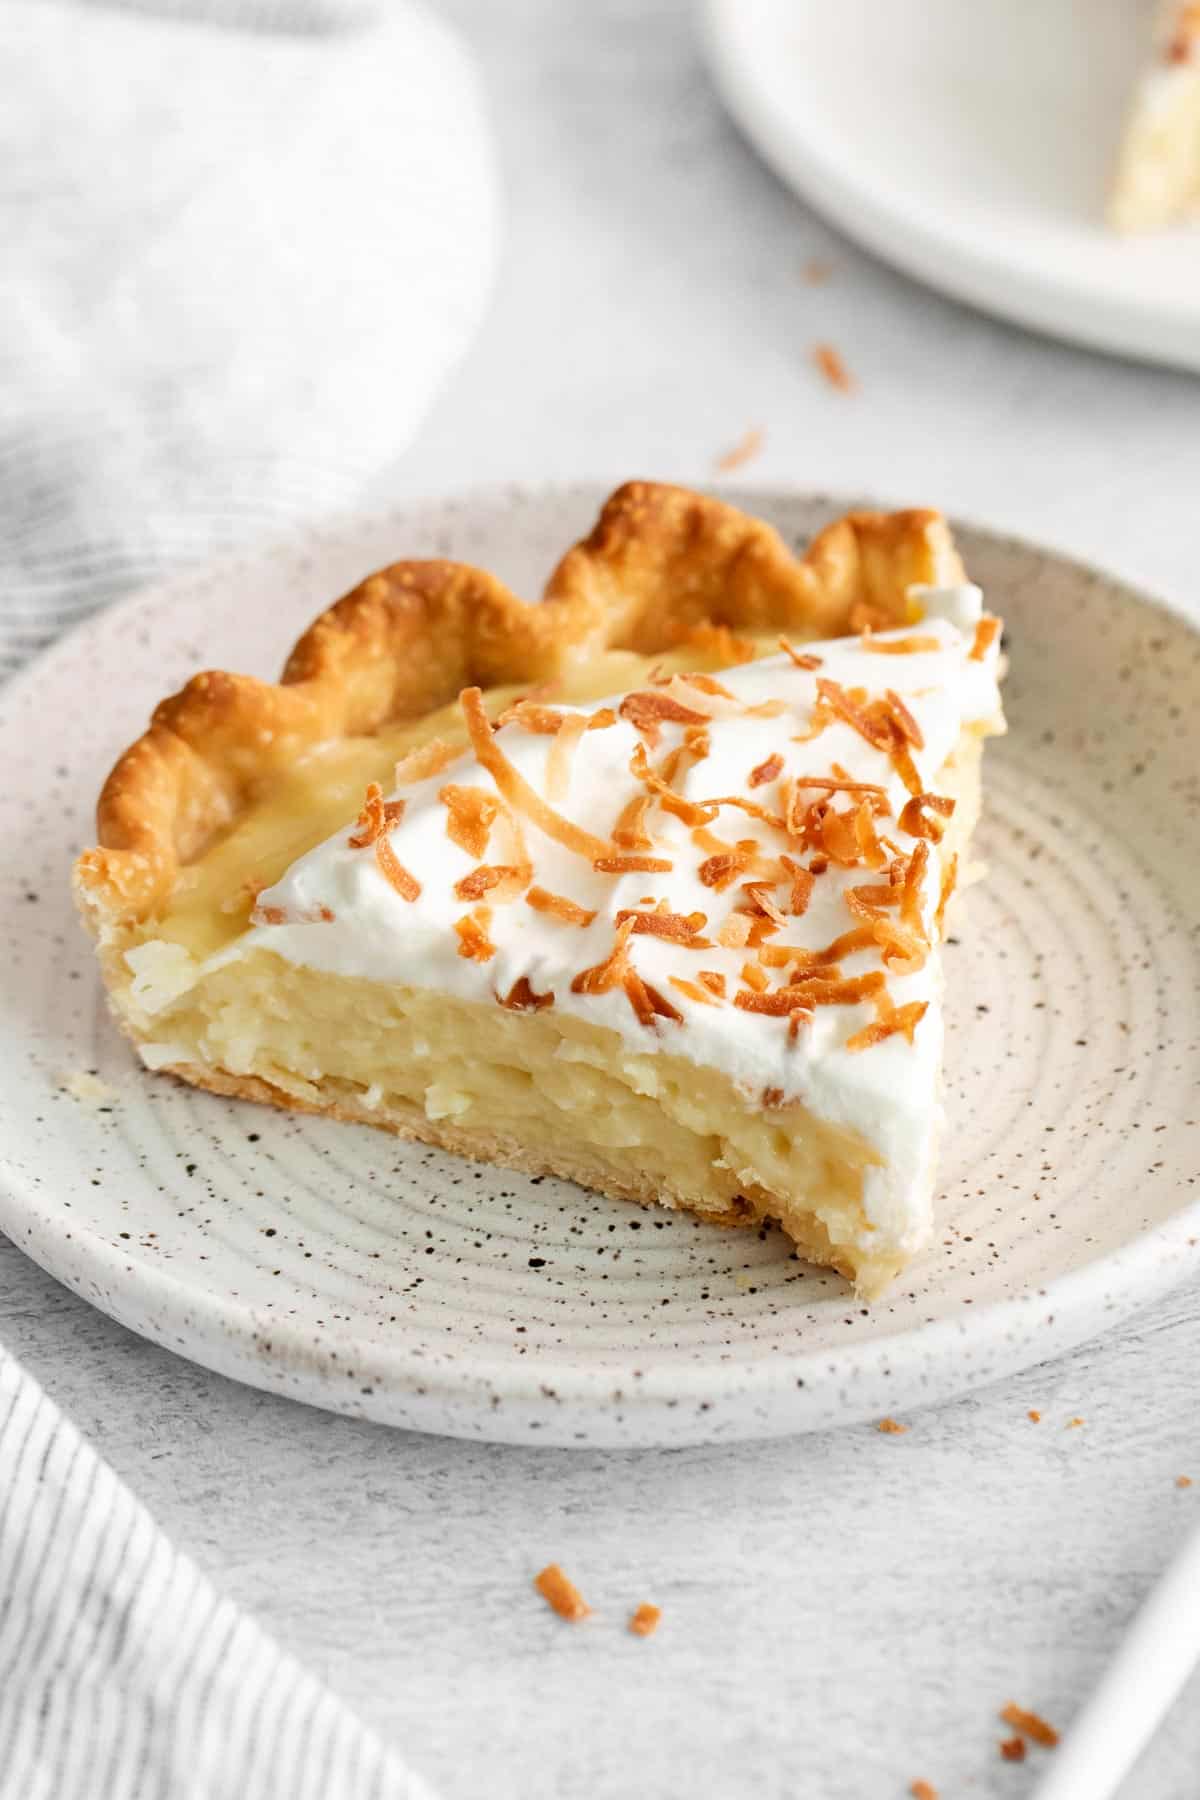 A slice of coconut cream pie on a plate